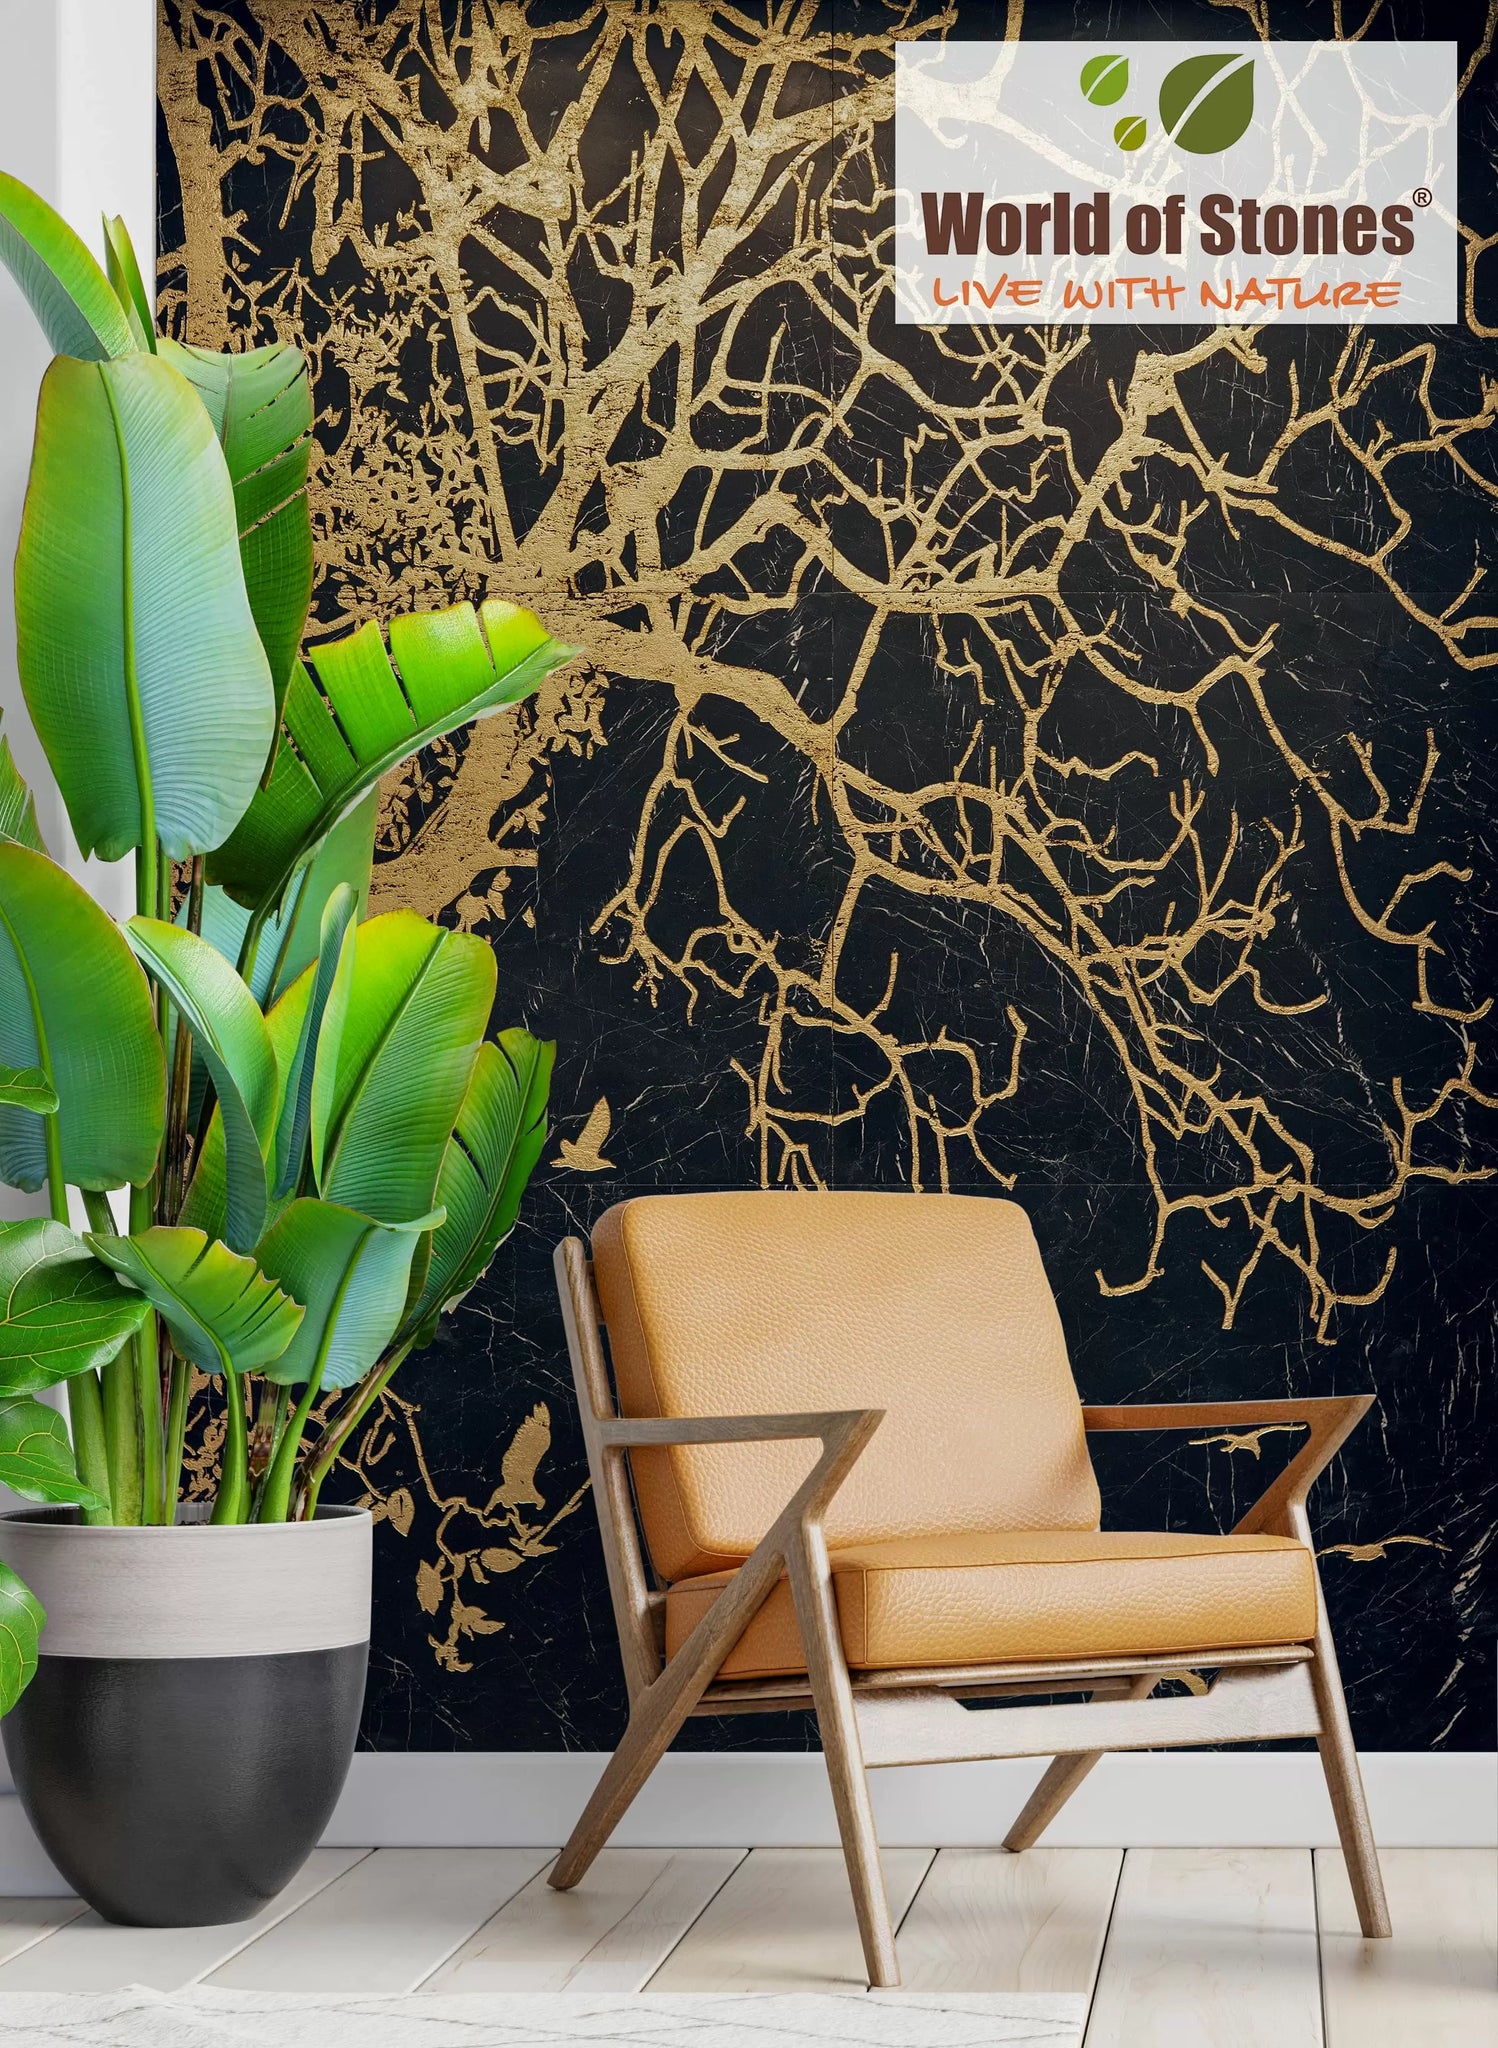 Black Marble Uses And Types To Help You Take The Best Decision